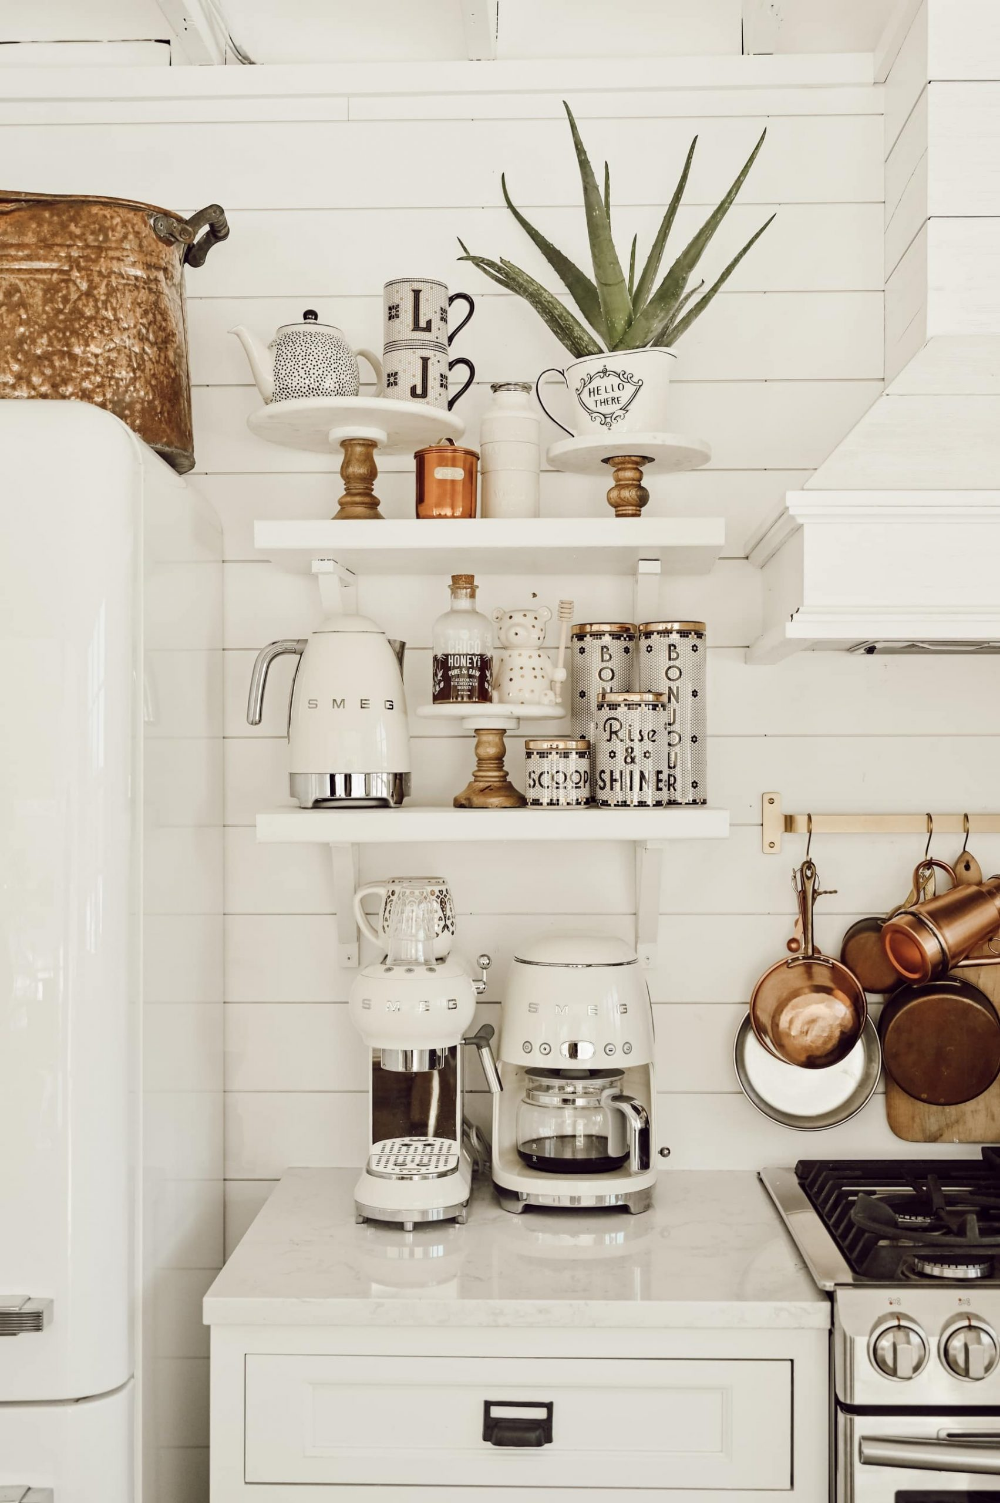 A Kitchen isn't Complete without a Coffee Bar☕ - Inspire Me Home